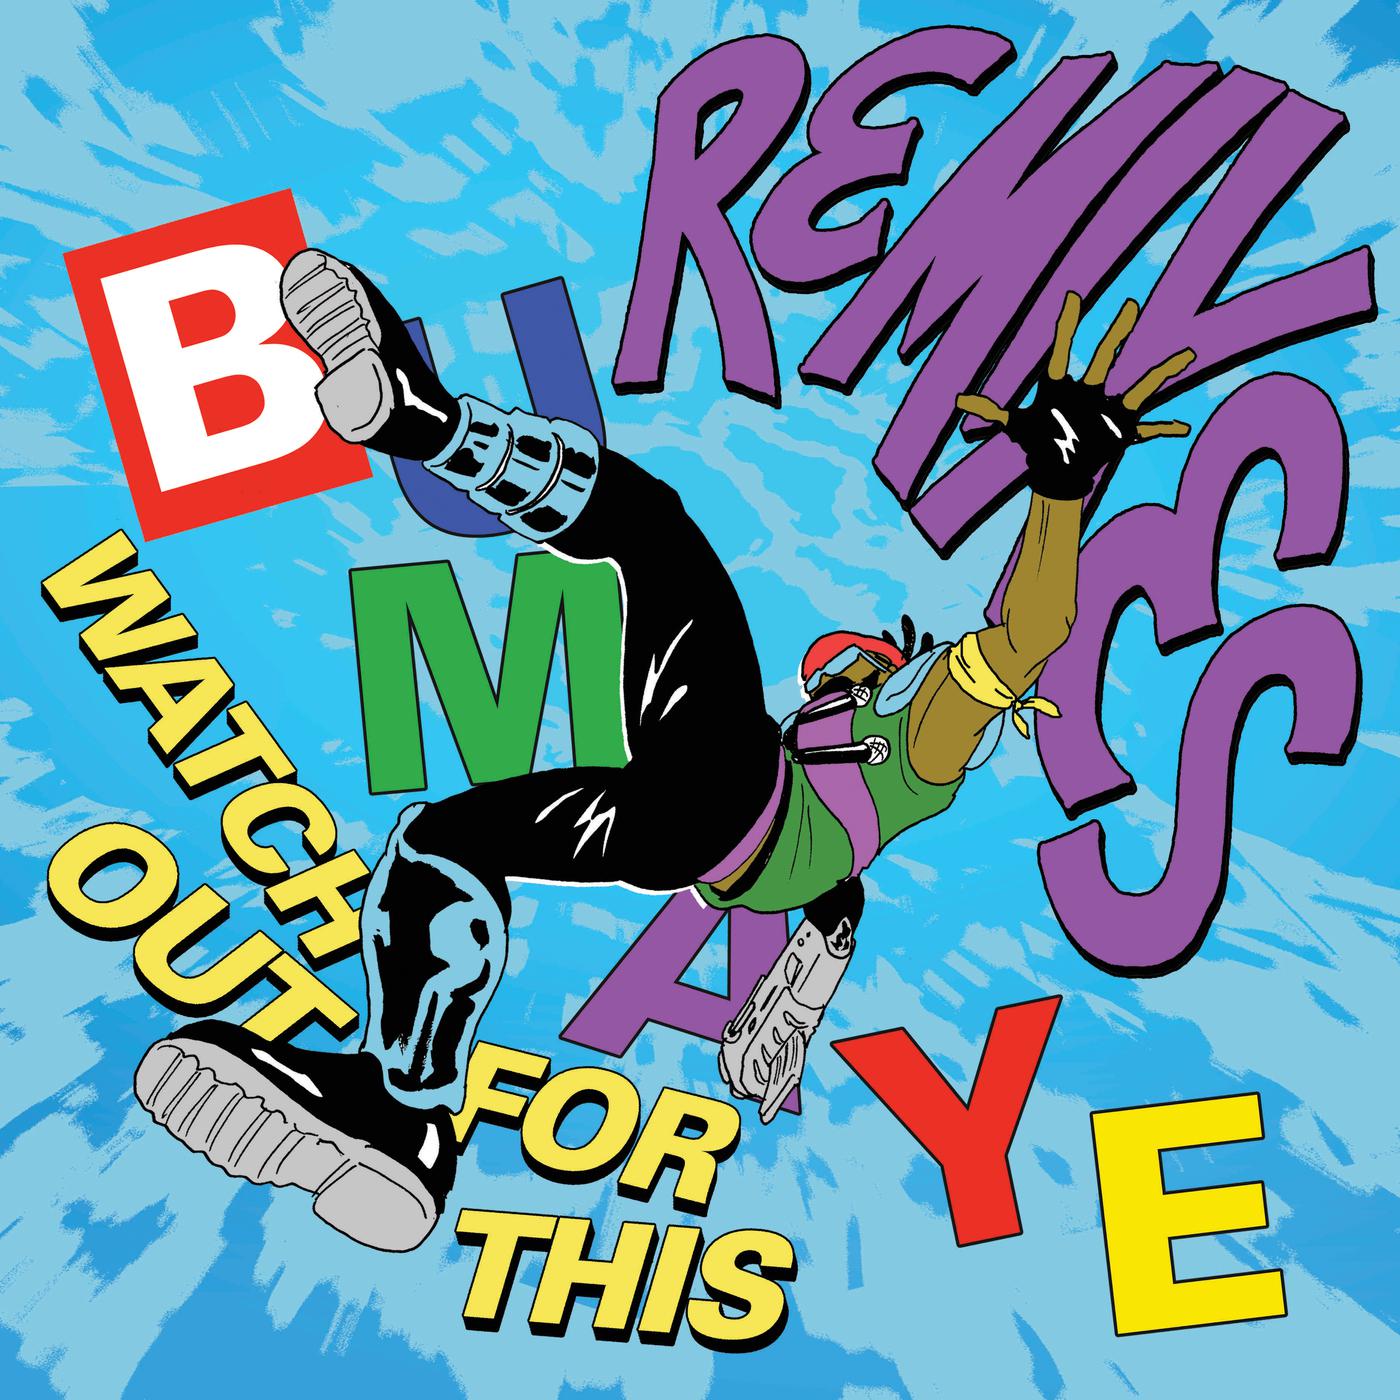 Watch Out For This (Bumaye) (Remixes)专辑